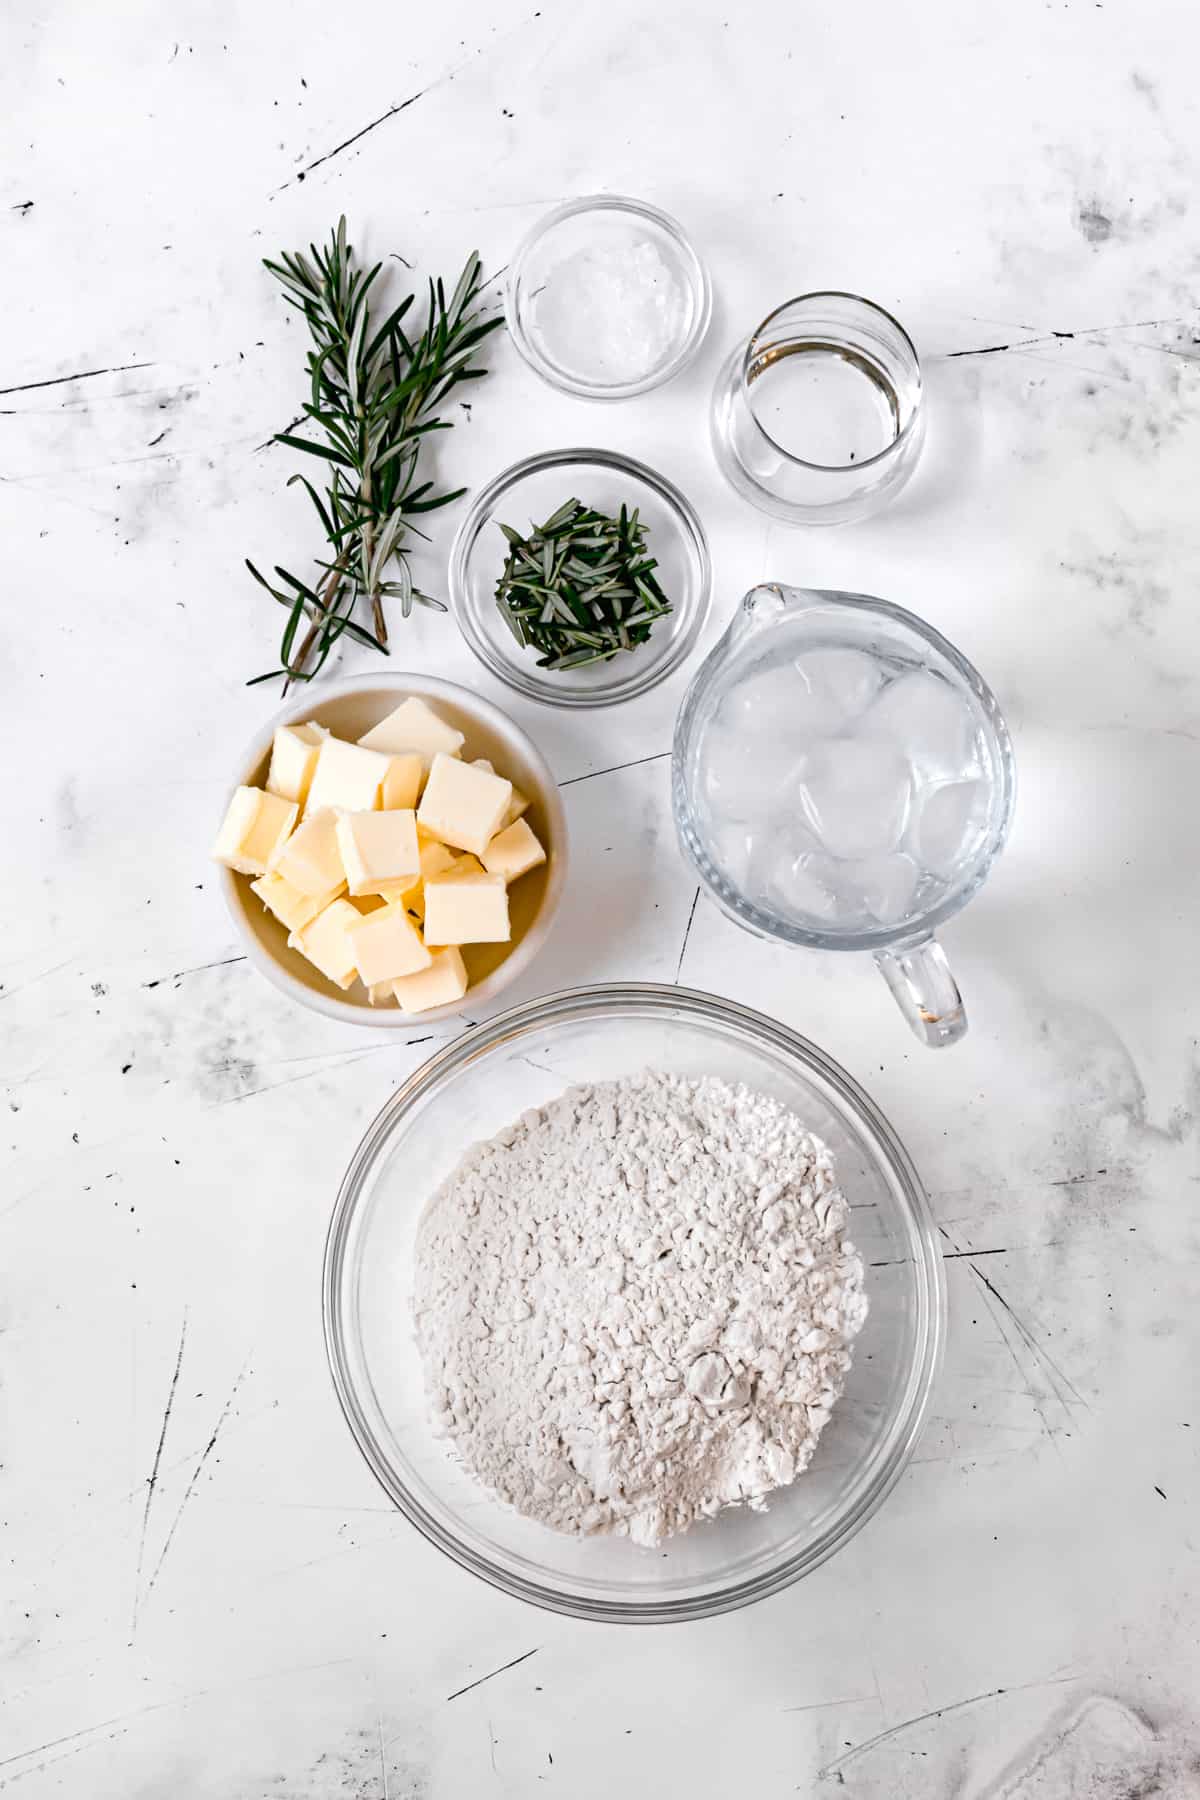 ingredients for the rosemary pie crust.